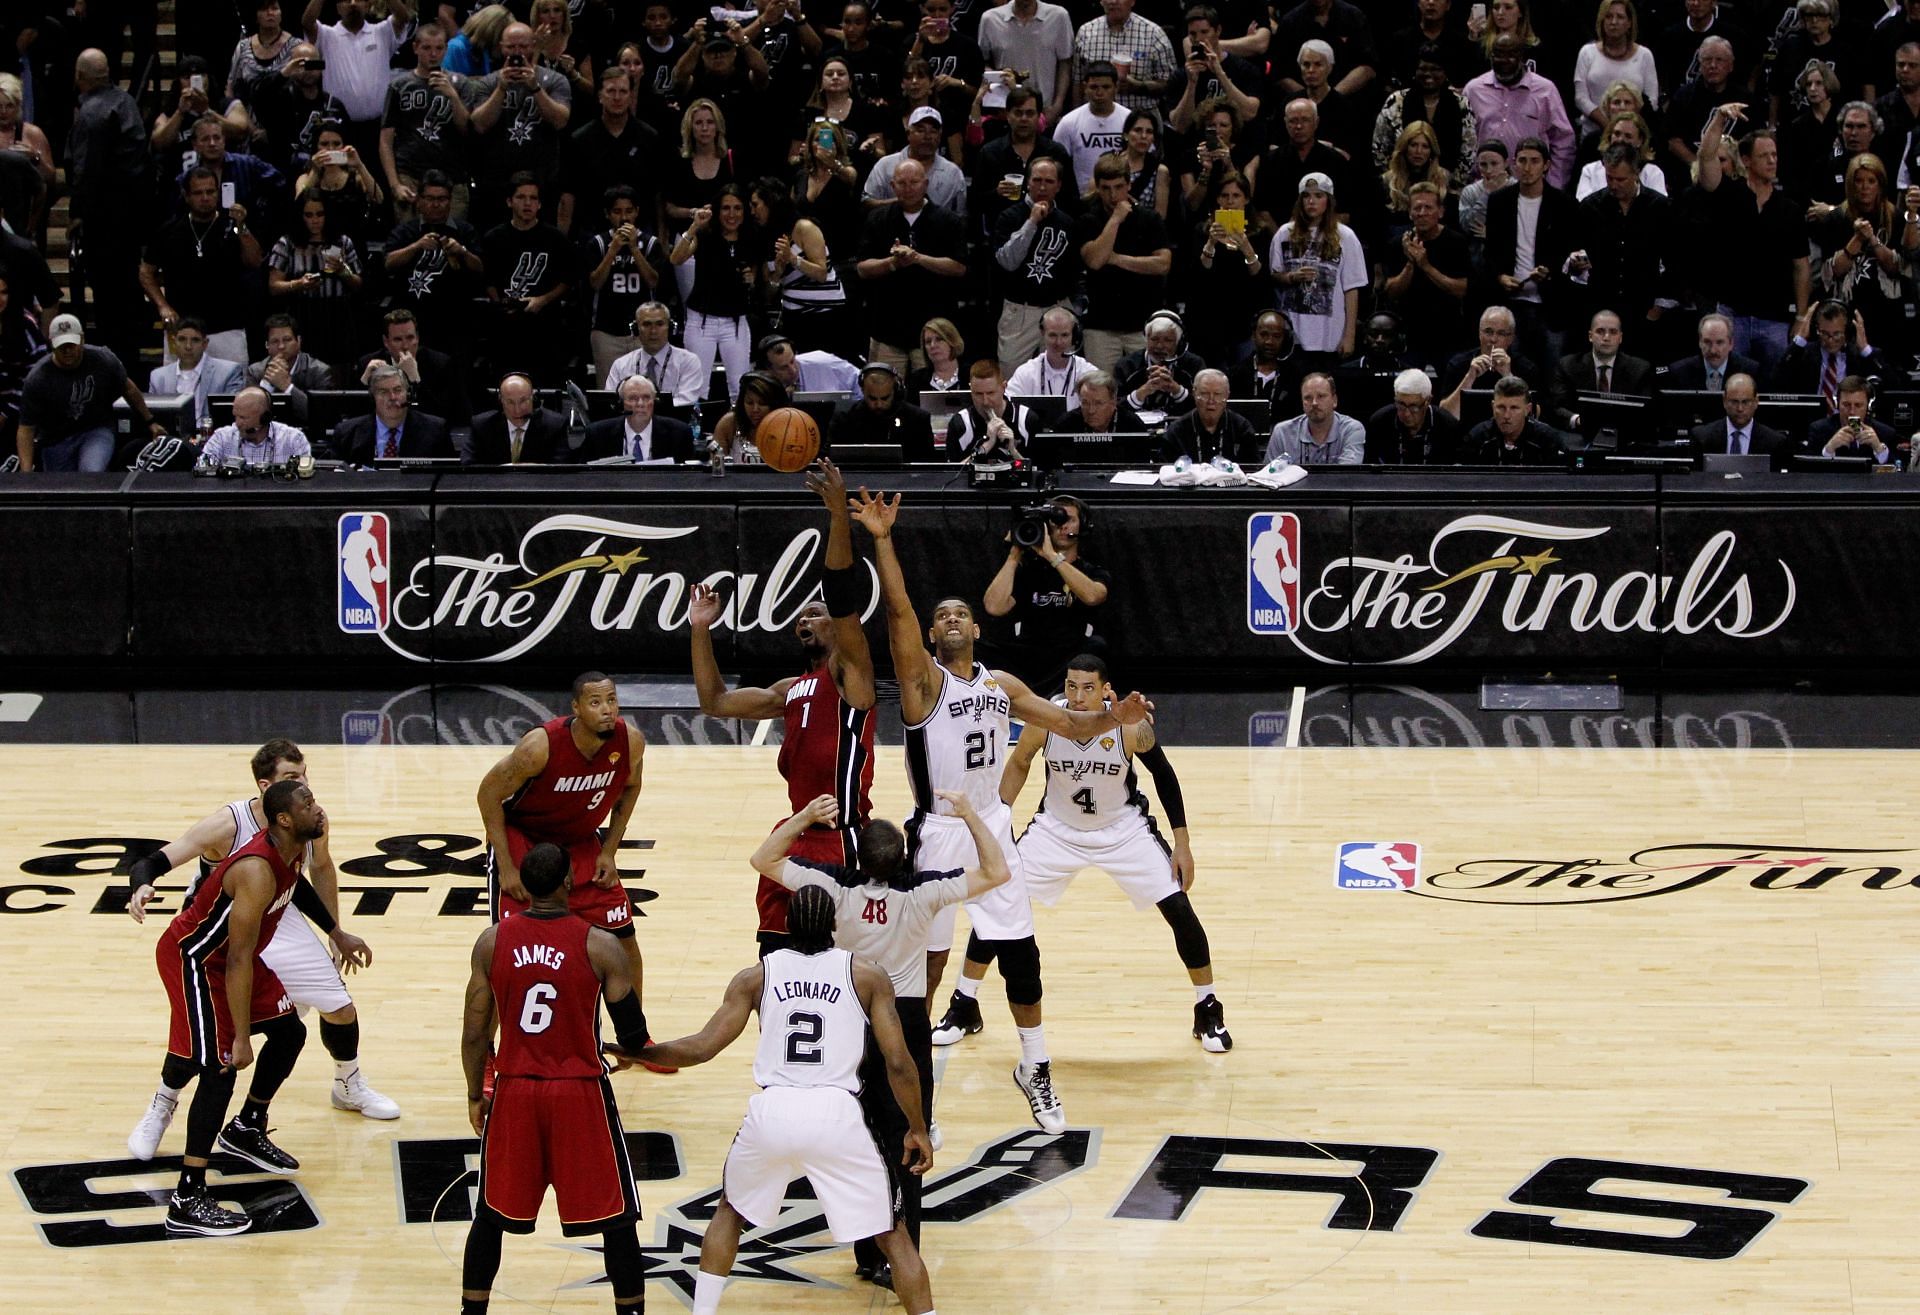 The 2014 San Antonio Spurs excorcised the demons of their brutal 2013 NBA Finals loss with a vengeful thrashing of the Miami Heat in a rematch.